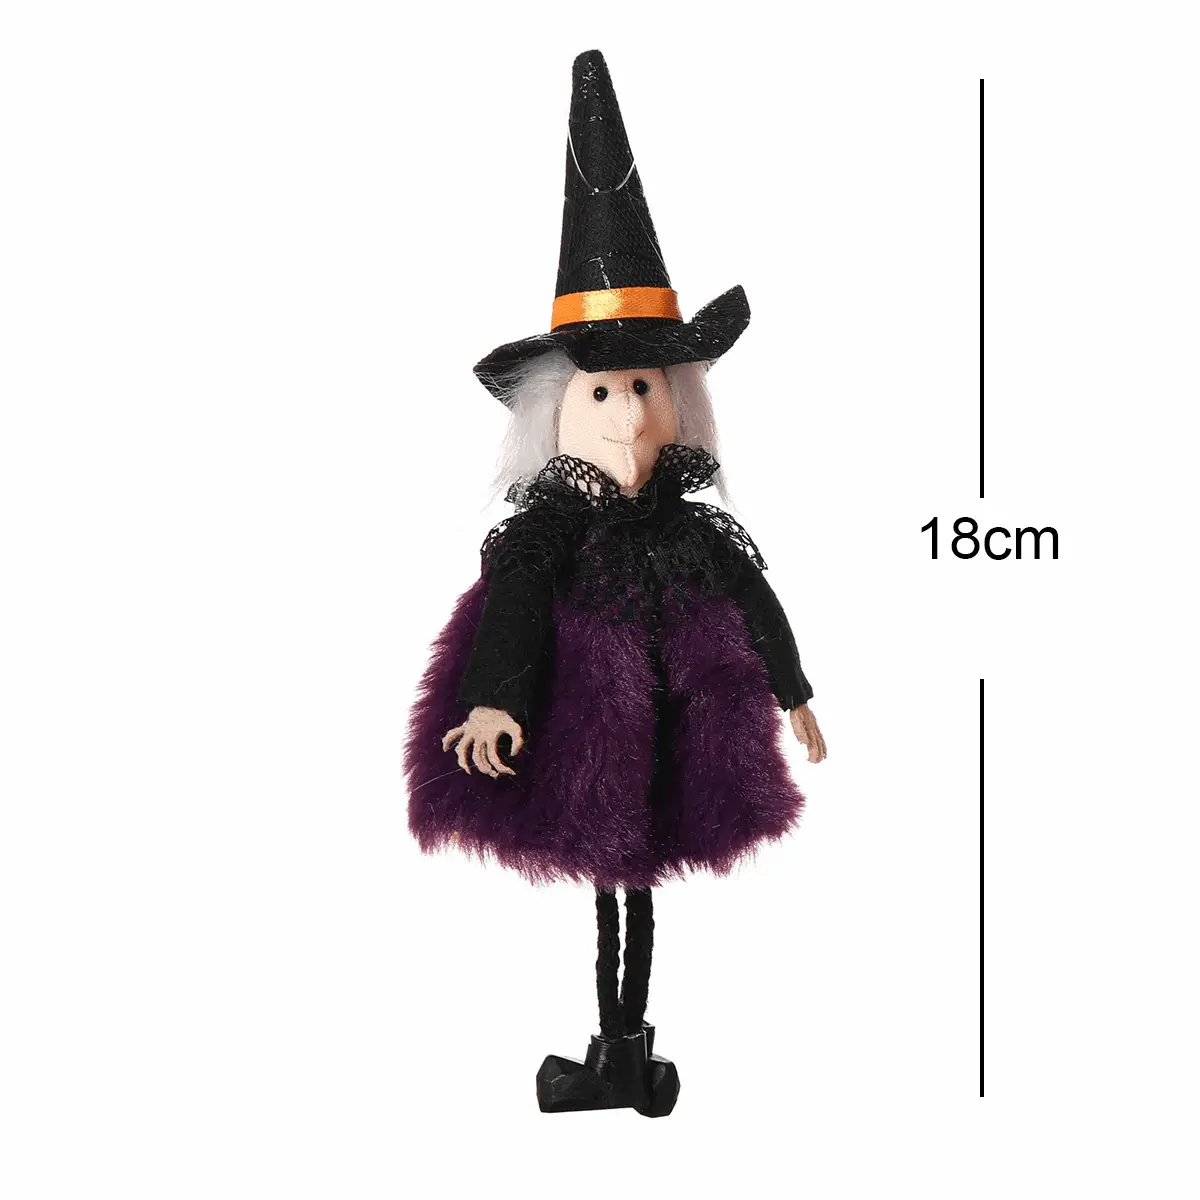 a doll wearing a witches costume and a hat